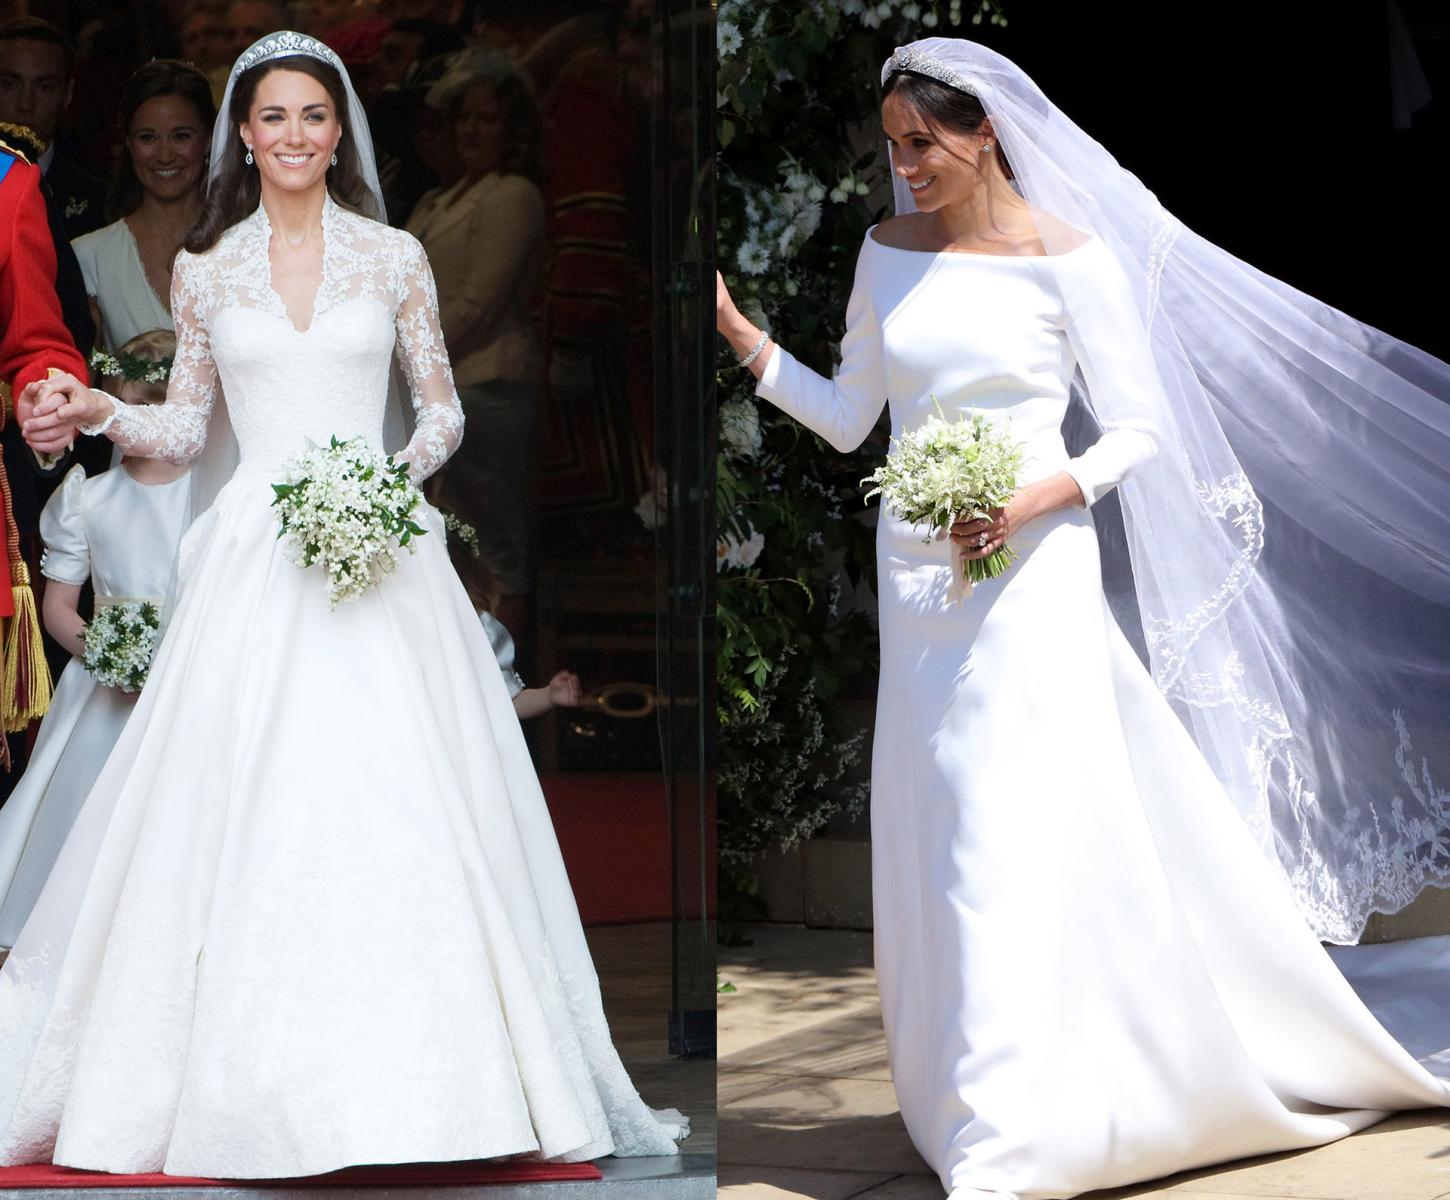 The One Major Difference Between Kate and Meghan's Wedding Dresses - image 1